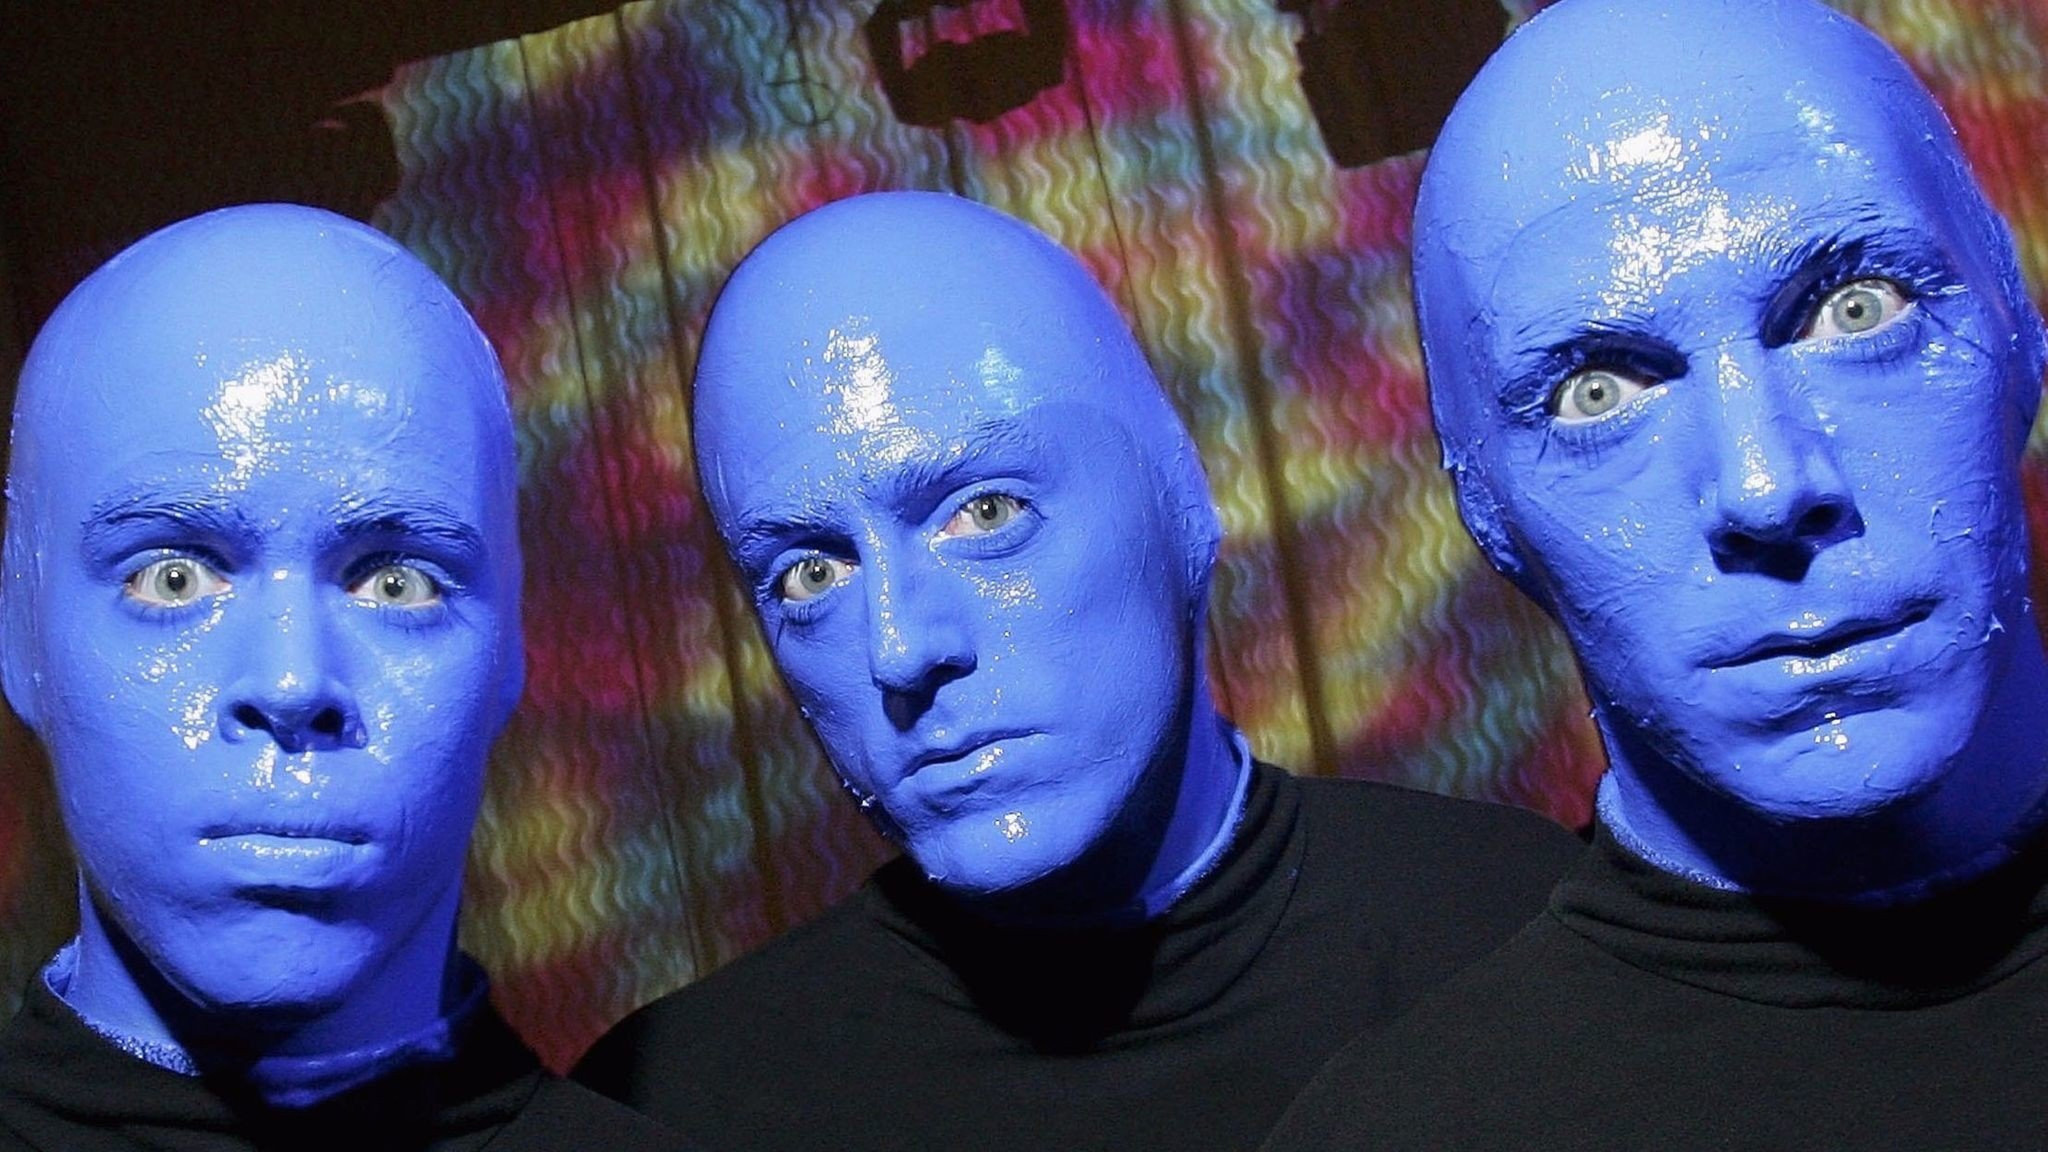 Blue Man Group offers up discounts for Florida residents